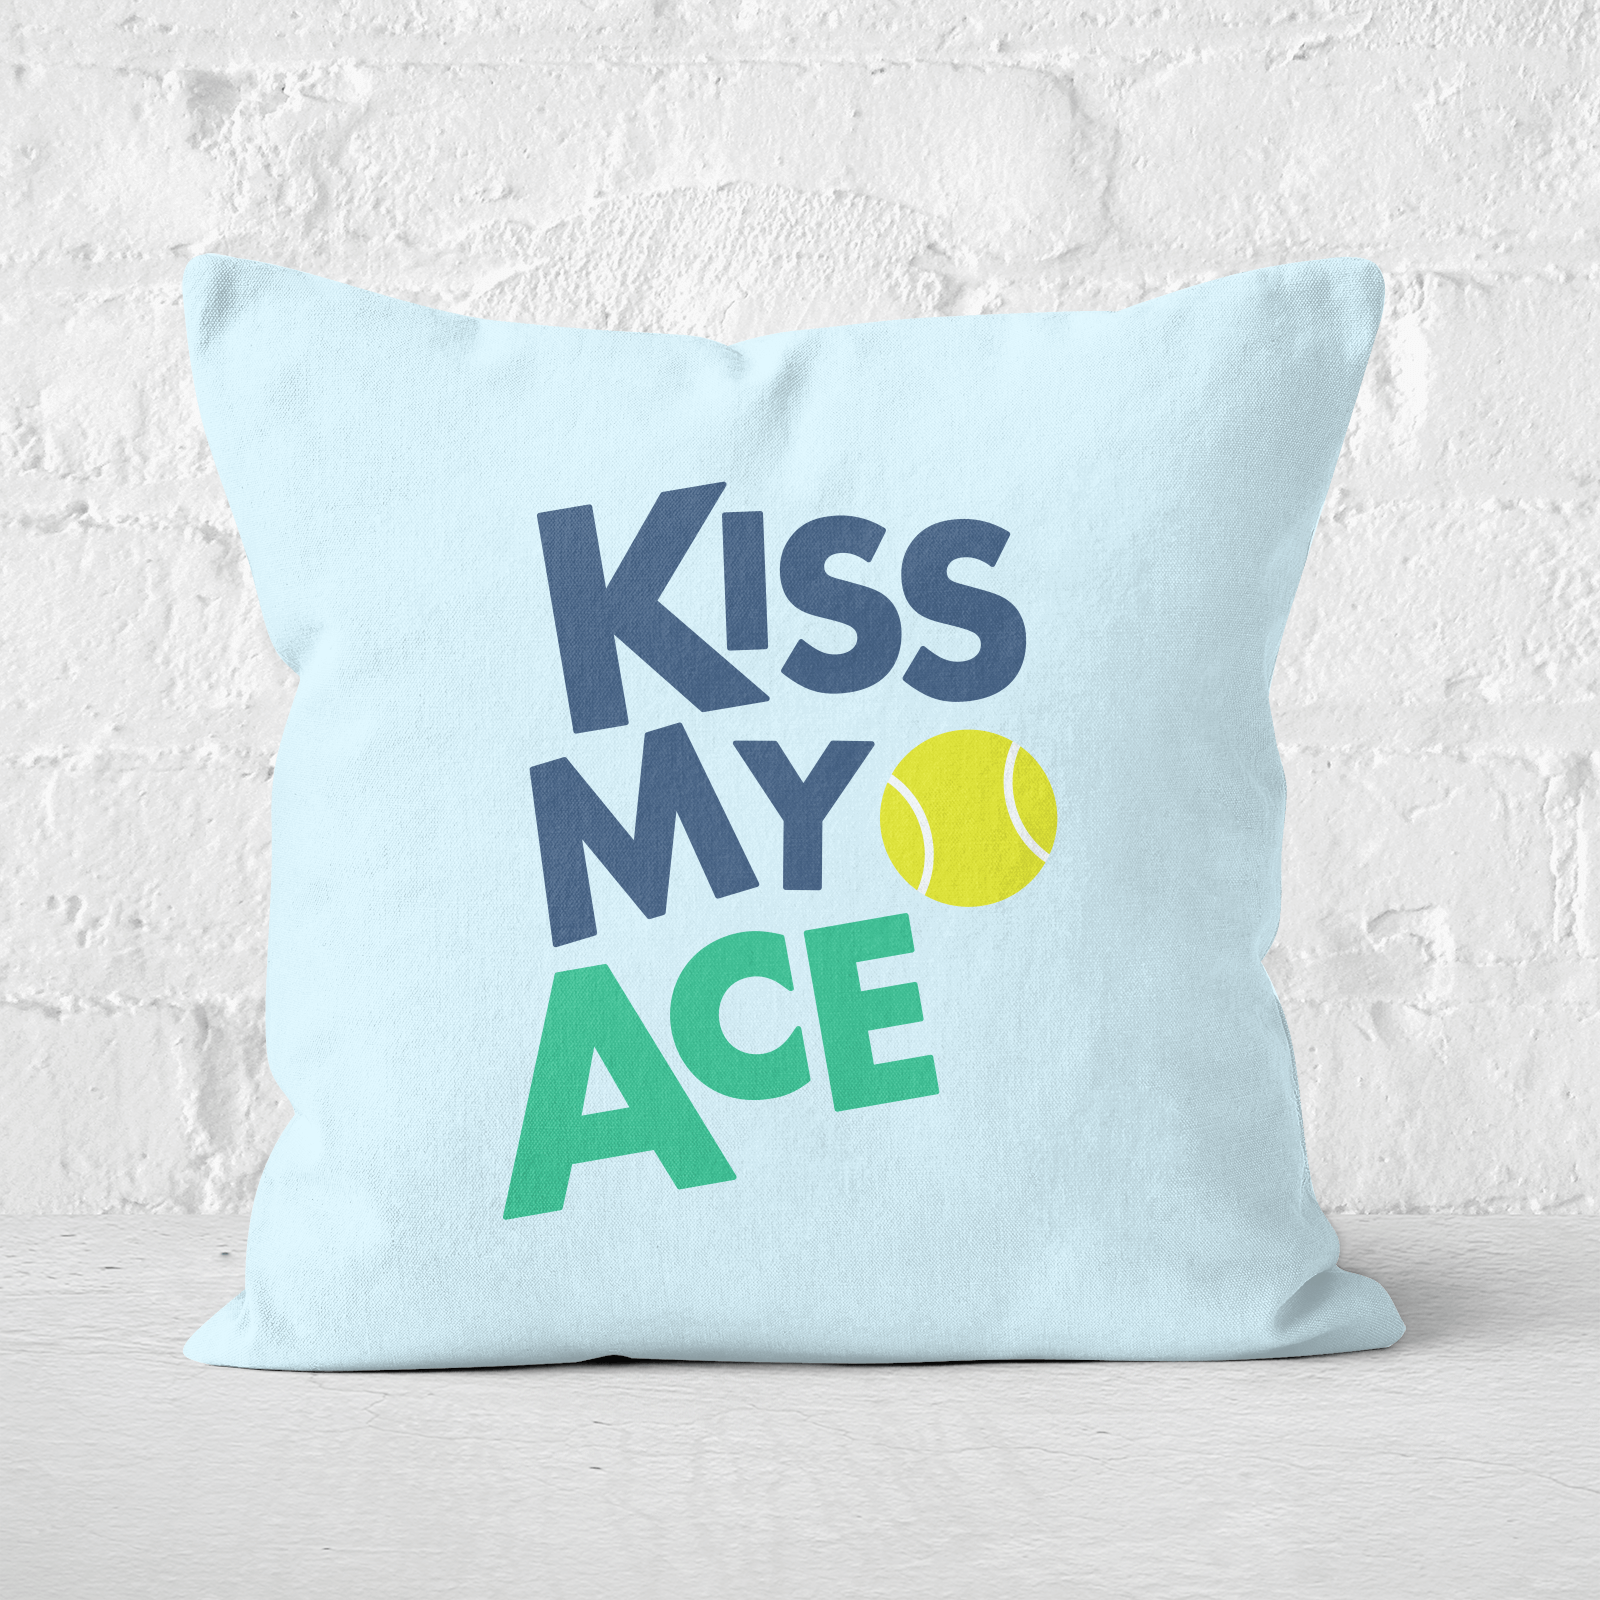 Kiss My Ace Square Cushion   60x60cm   Soft Touch